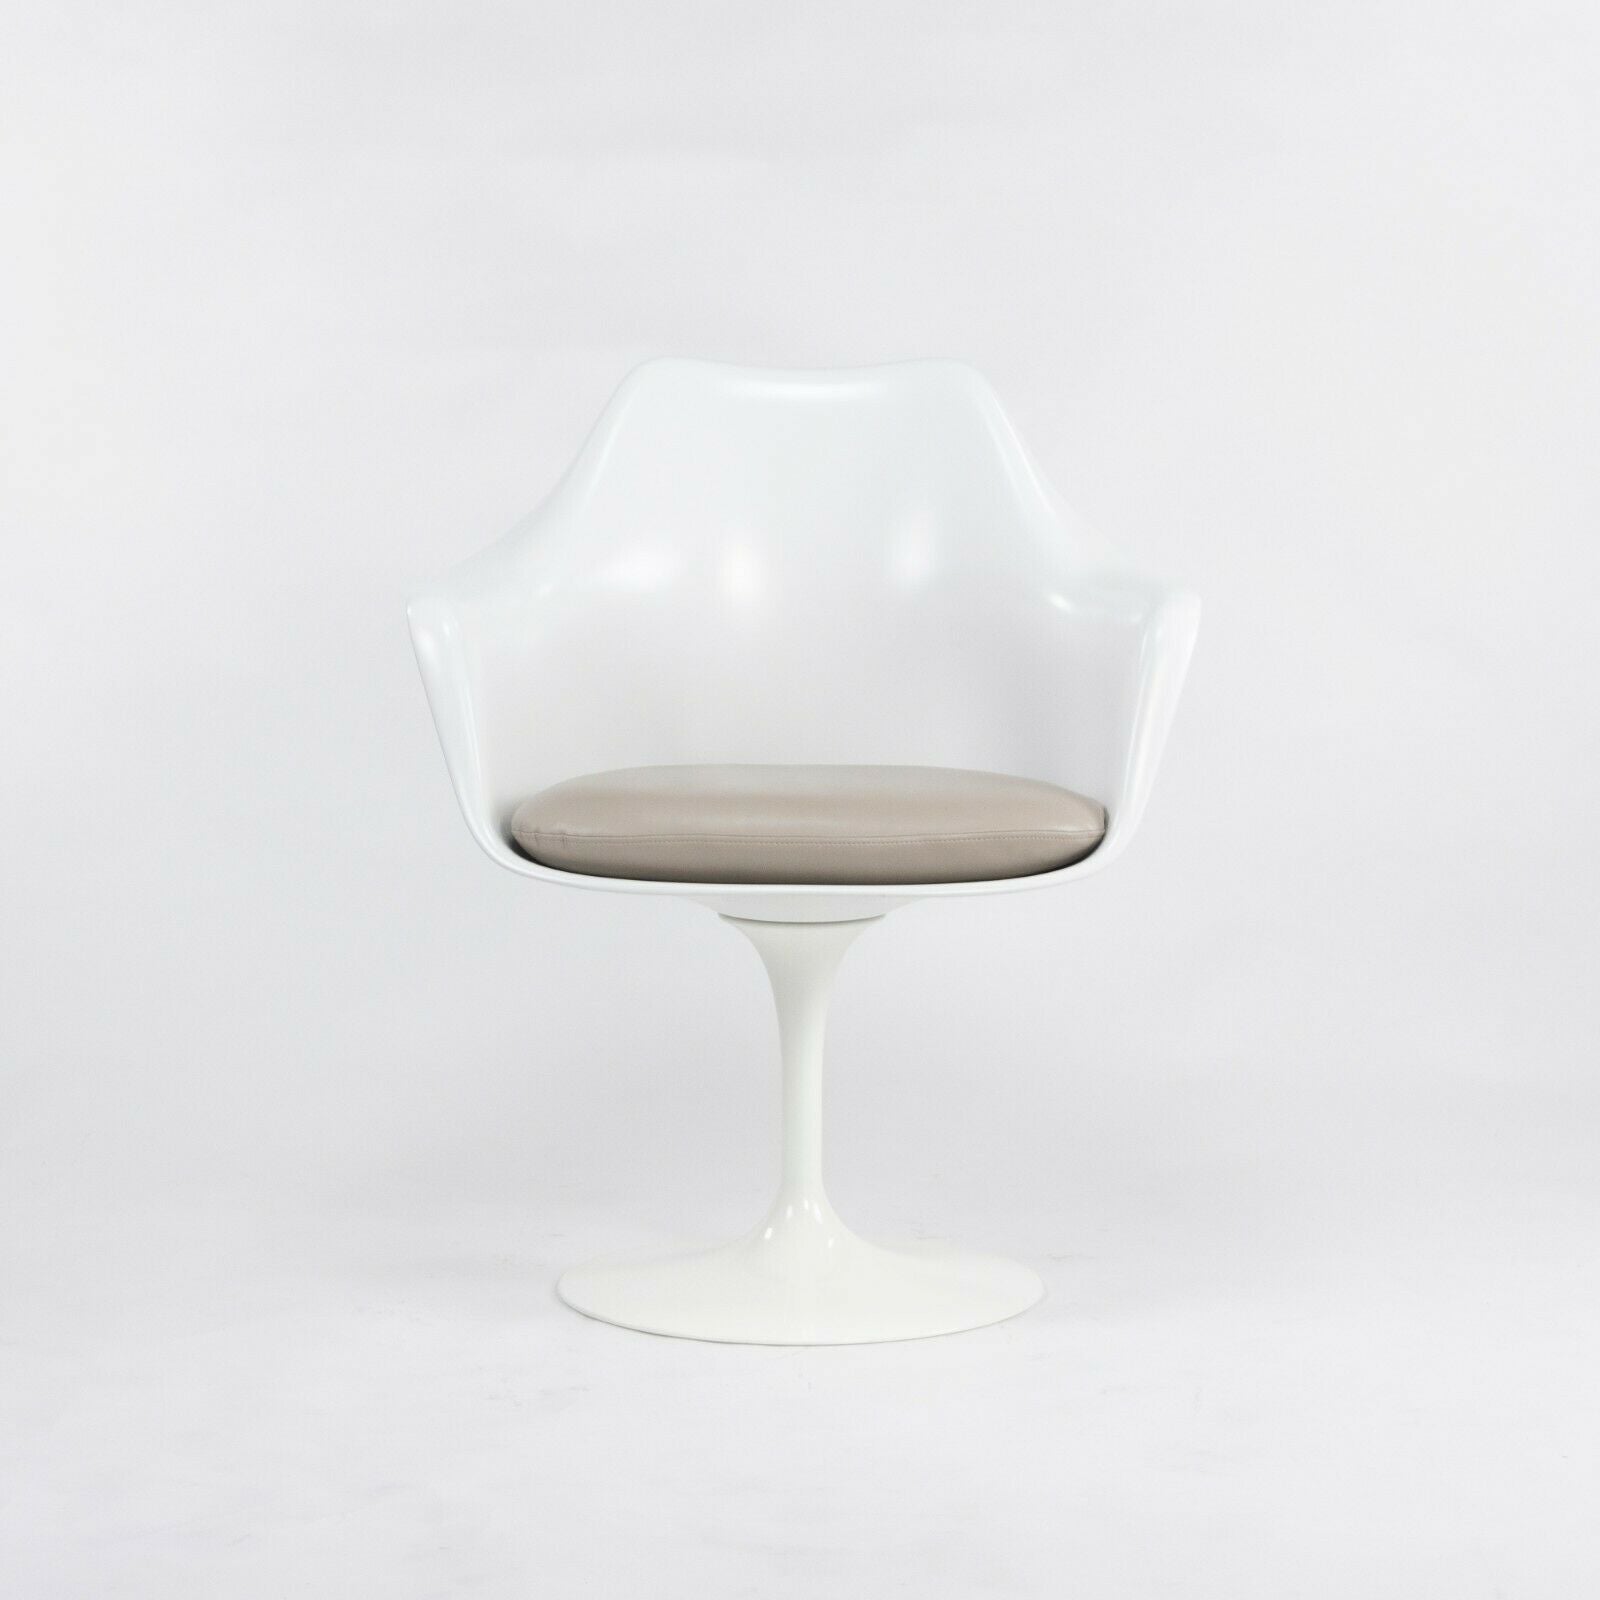 SOLD 2014 Eero Saarinen for Knoll White Tulip Dining Arm Chair 6 8 10 12 Available